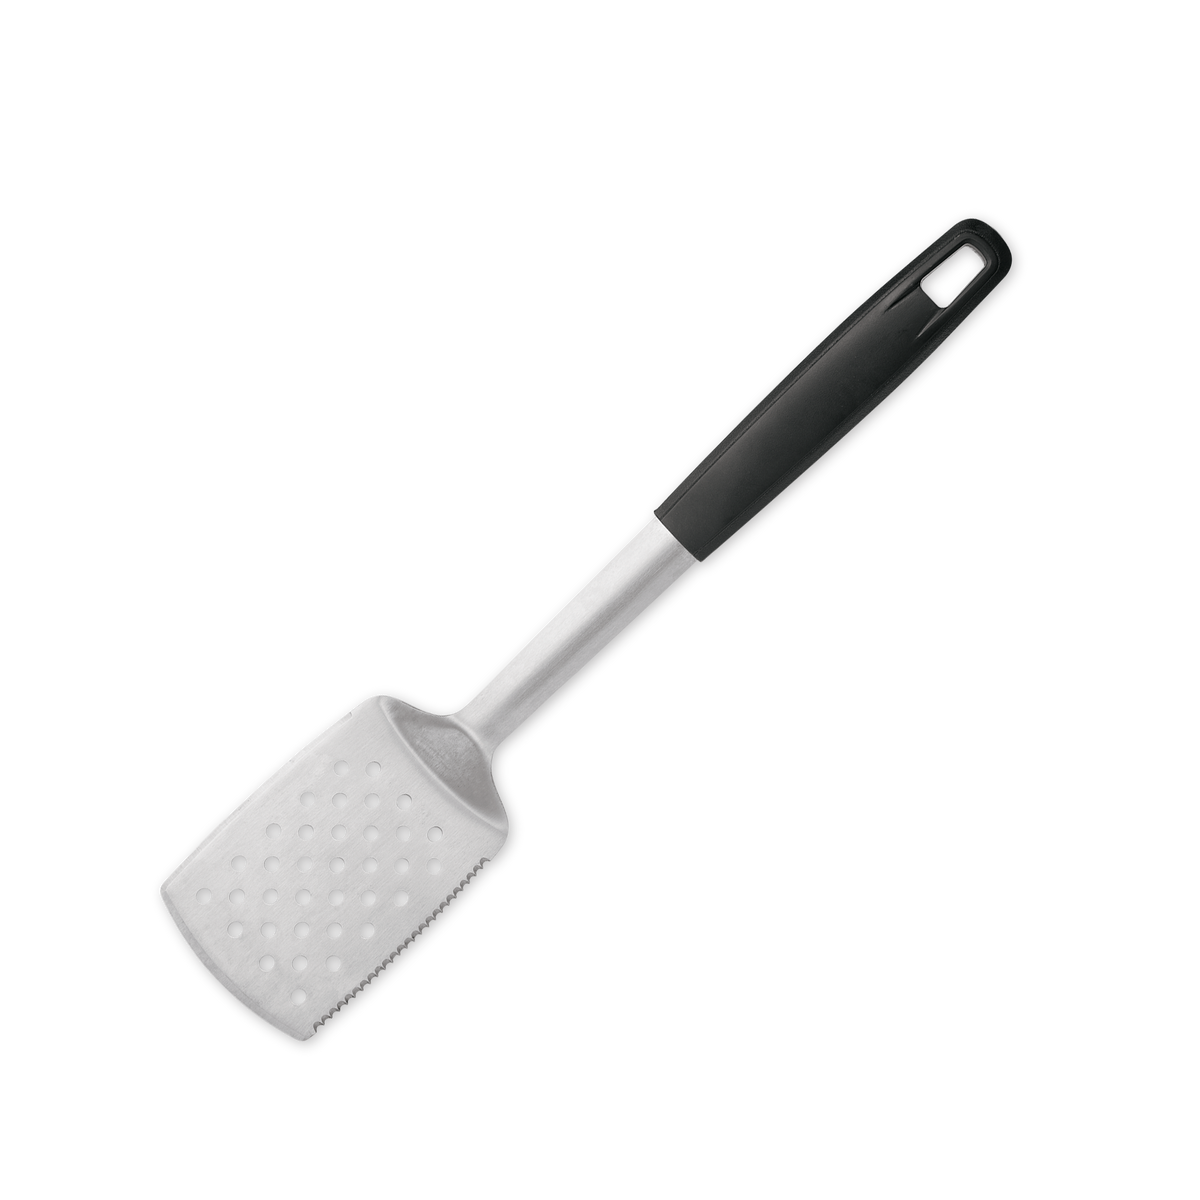 Grill spatula. Stainless steel. Large perforated blade. Non-slip nylon handle. Serrated edge for cutting. Brandless. Designed for outdoor grills.